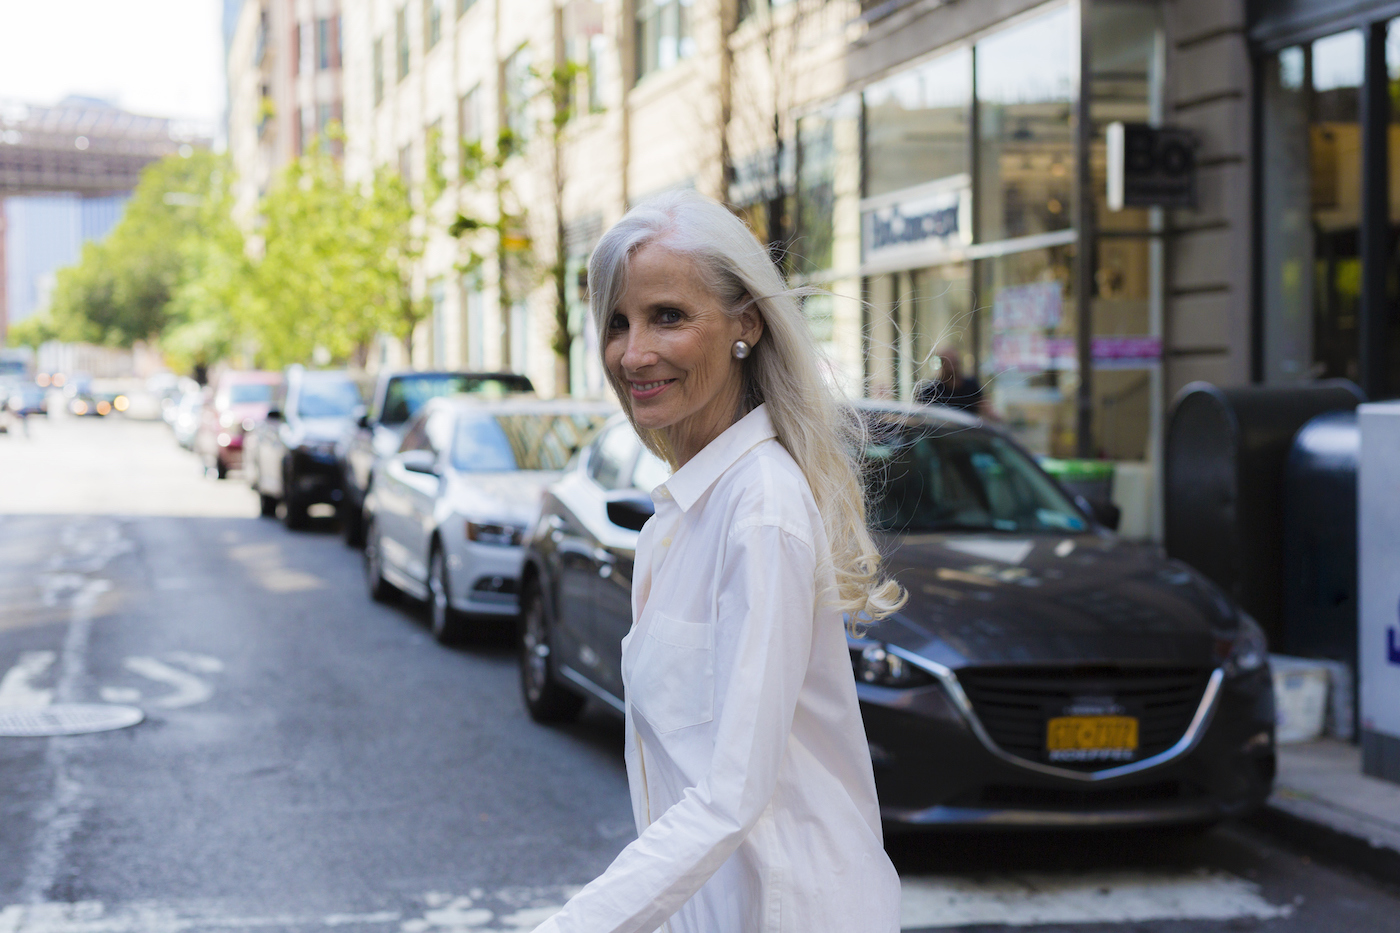 A woman with long gray hair and a white blouse turns back to the camera and smiles as she crosses a street in Brooklyn.